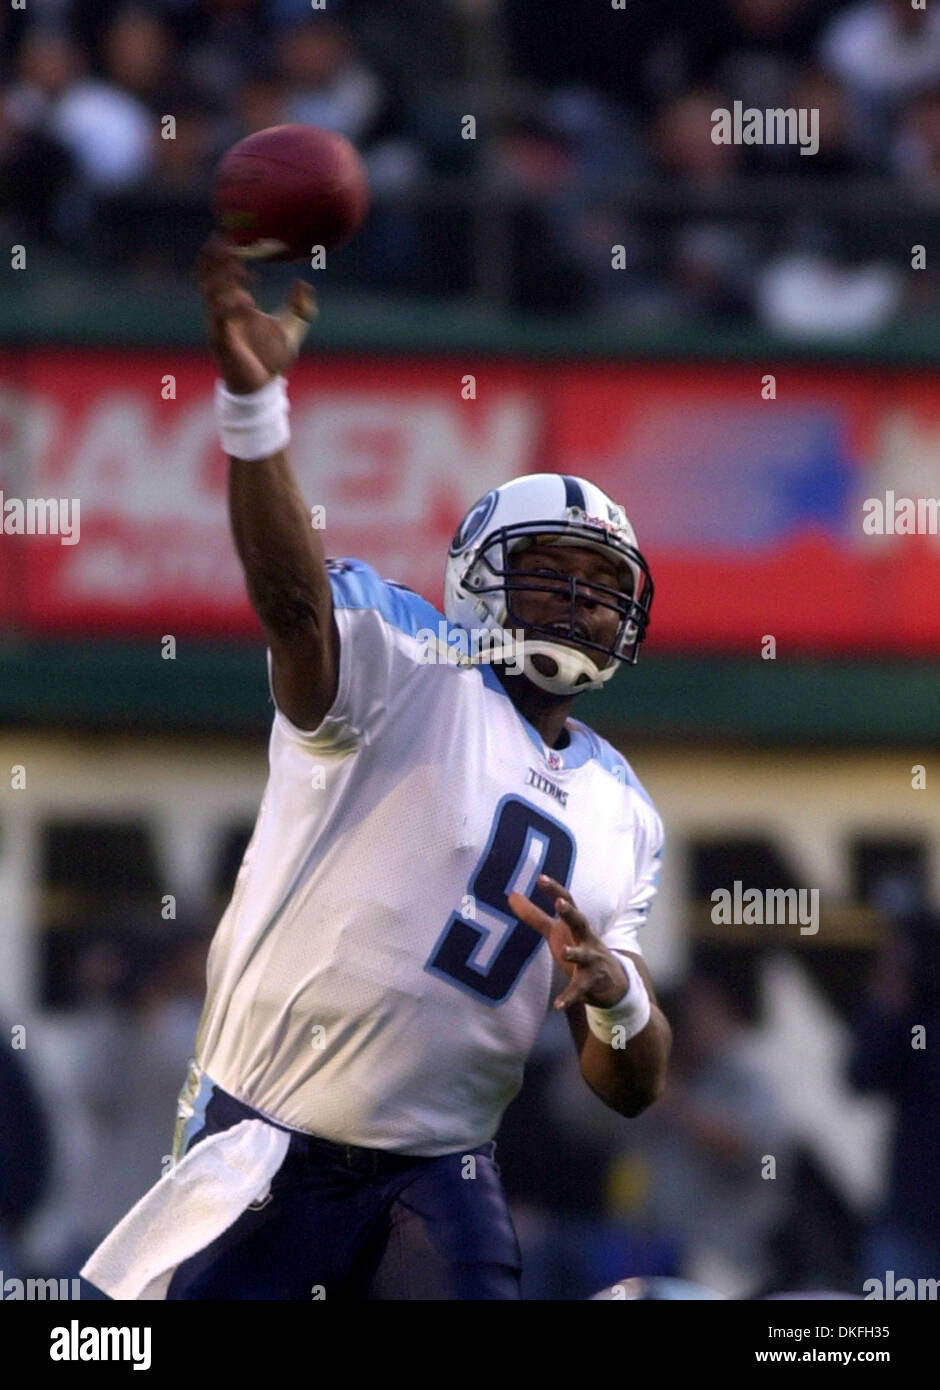 STEVE MCNAIR (Feb 14, 1973 - Jul 4, 2009), American National Football  League (NFL) quarterback from 1995-2008 when he retired. McNair played for  the Houston Oilers, Tennessee Titans and the Baltimore Ravens